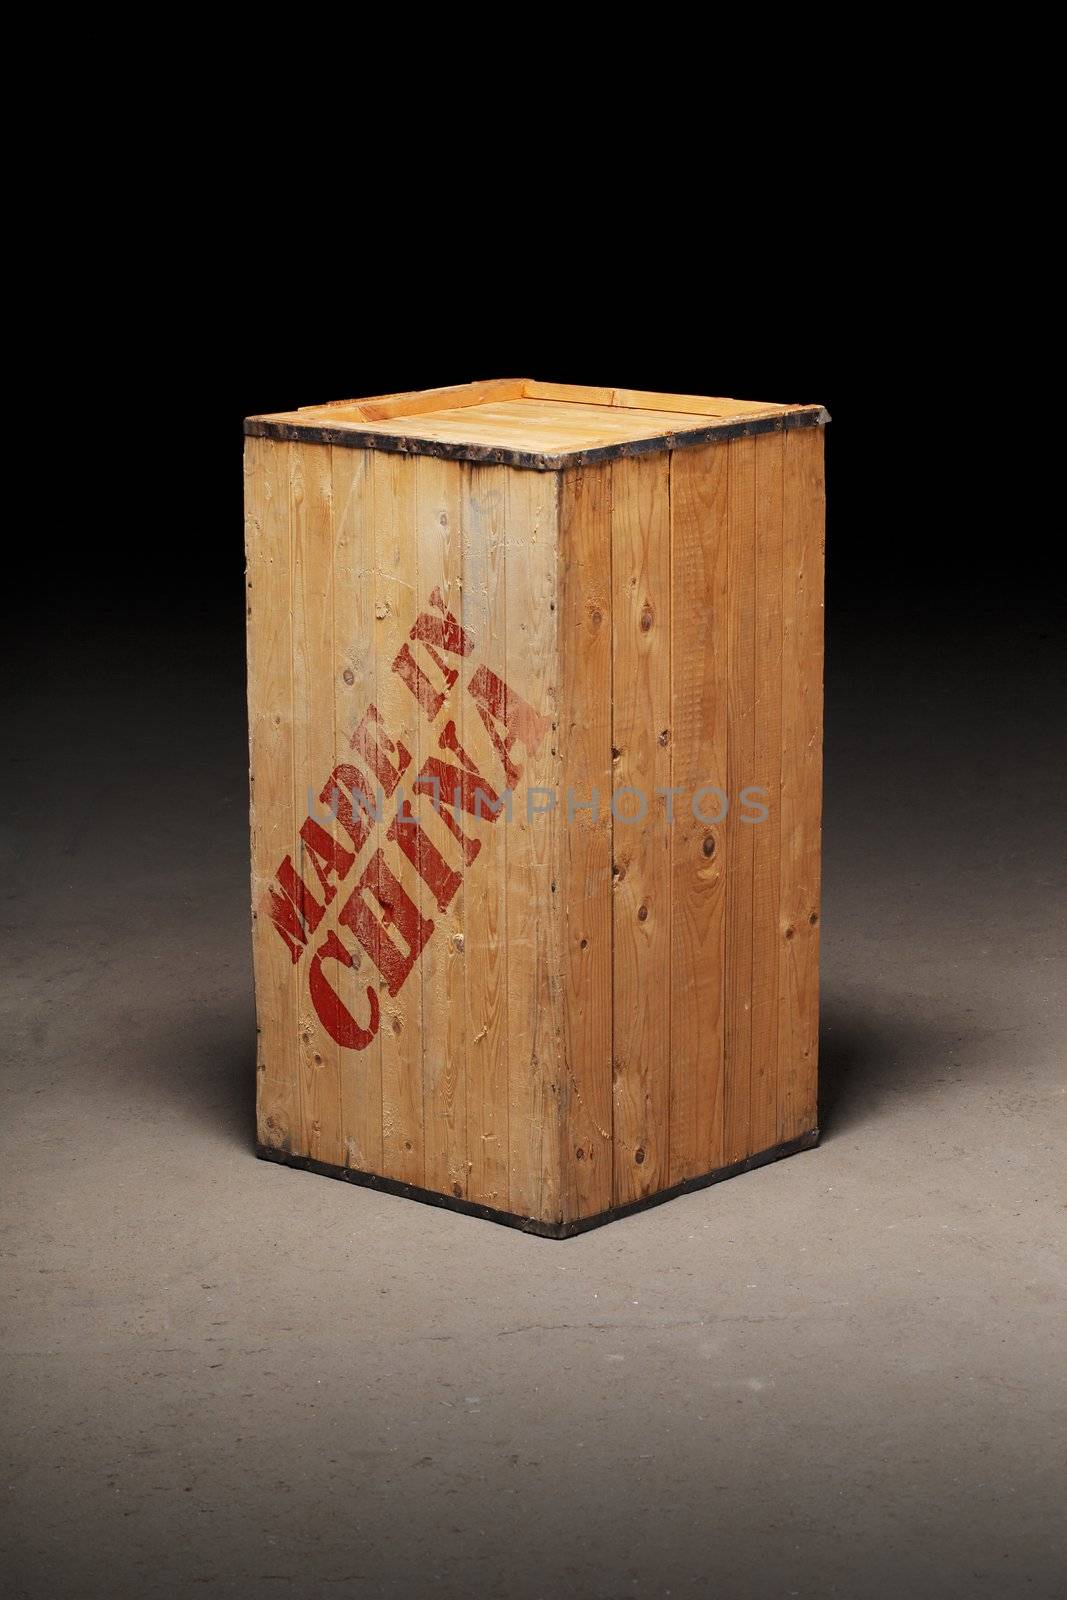 An old wooden crate with text "Made in China" on dirty concrete floor